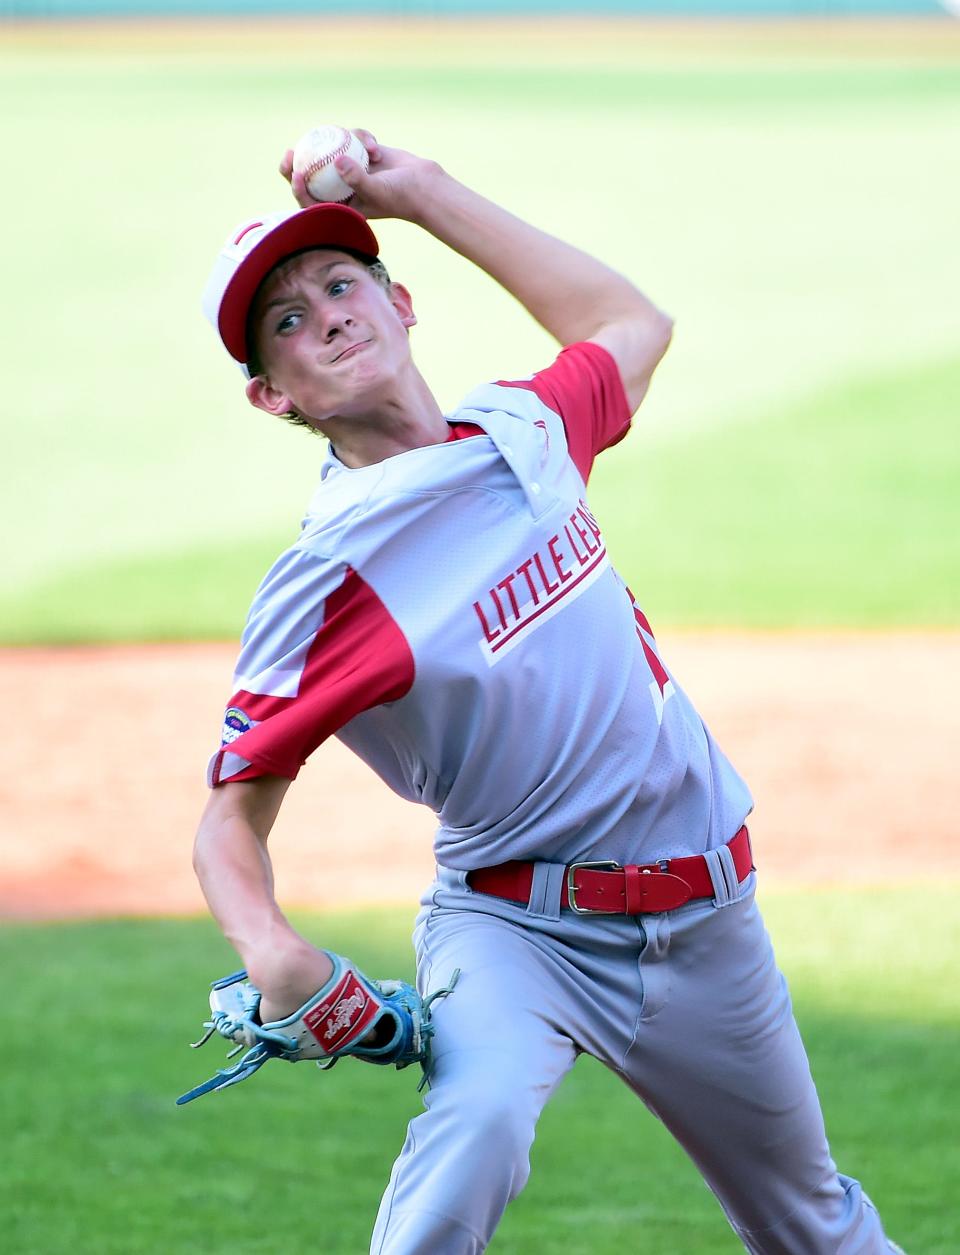 Aug 25, 2021; Williamsport, PA, USA; Midwest Region pitcher Gavin Weir (19) throws a pitch in the second inning against the West Region at Volunteer Stadium. Mandatory Credit: Evan Habeeb-USA TODAY Sports